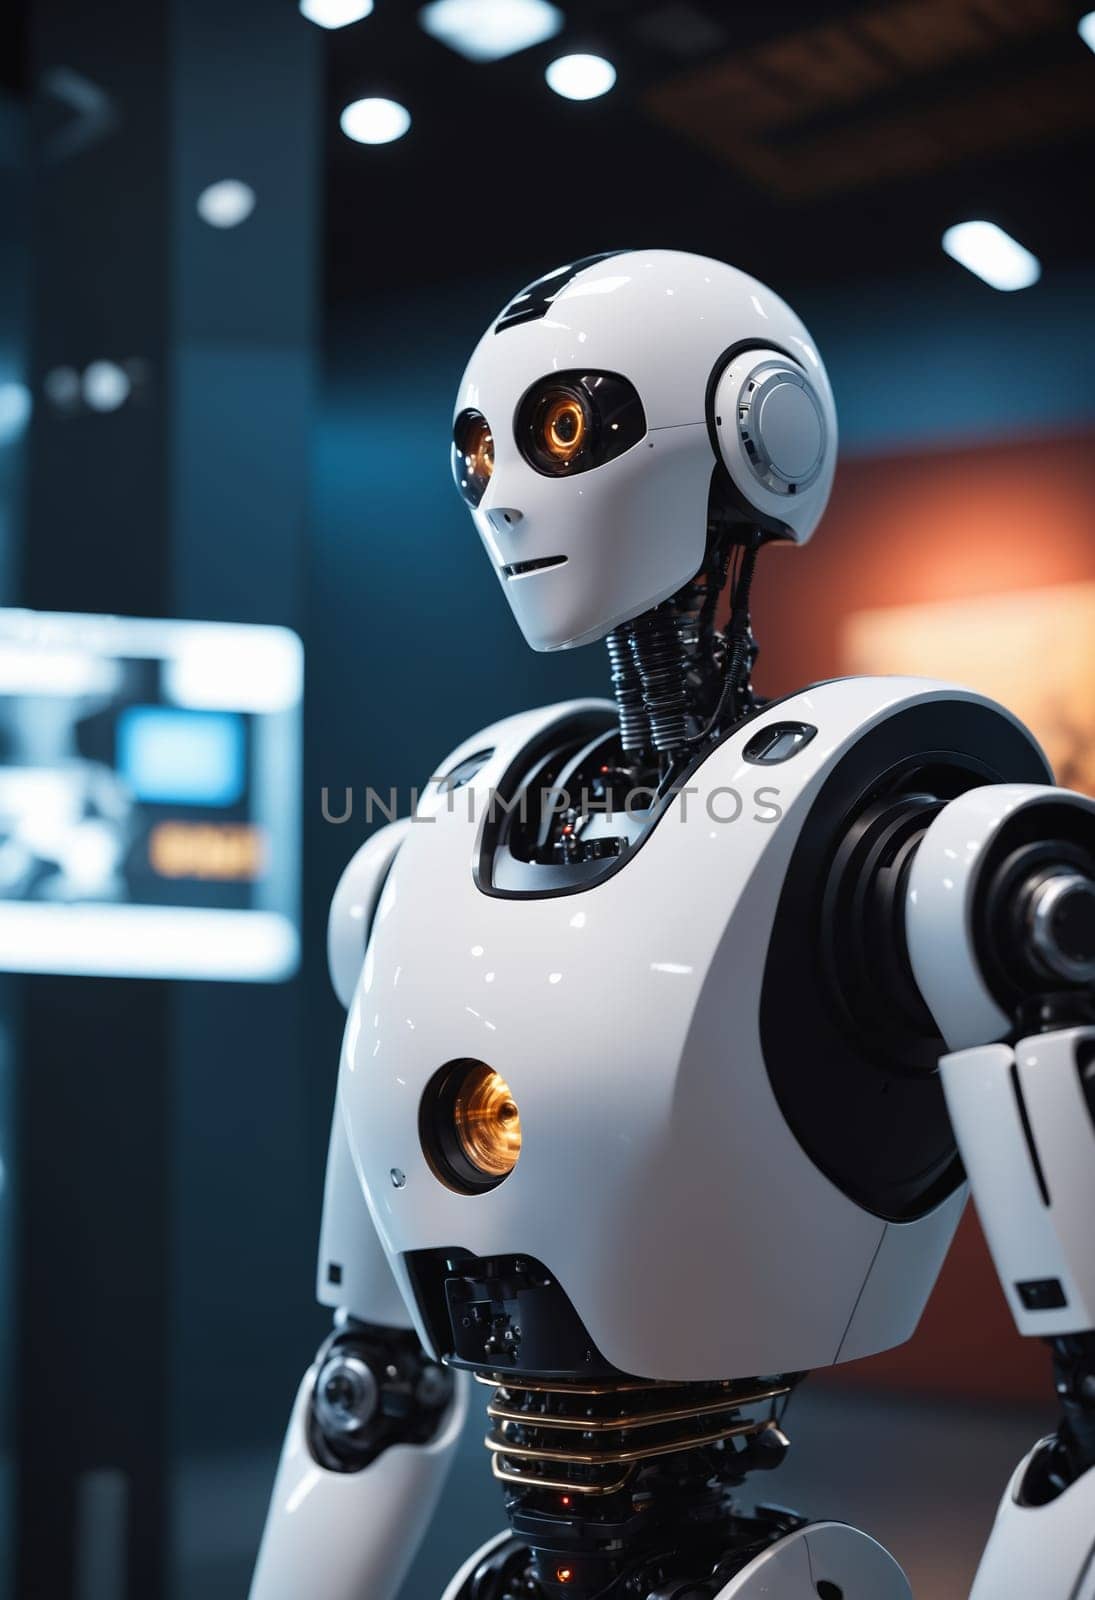 An automotive design robot resembling C3PO is depicted in a close up photo, wearing headphones. This fictional character showcases the fusion of machine and audio equipment